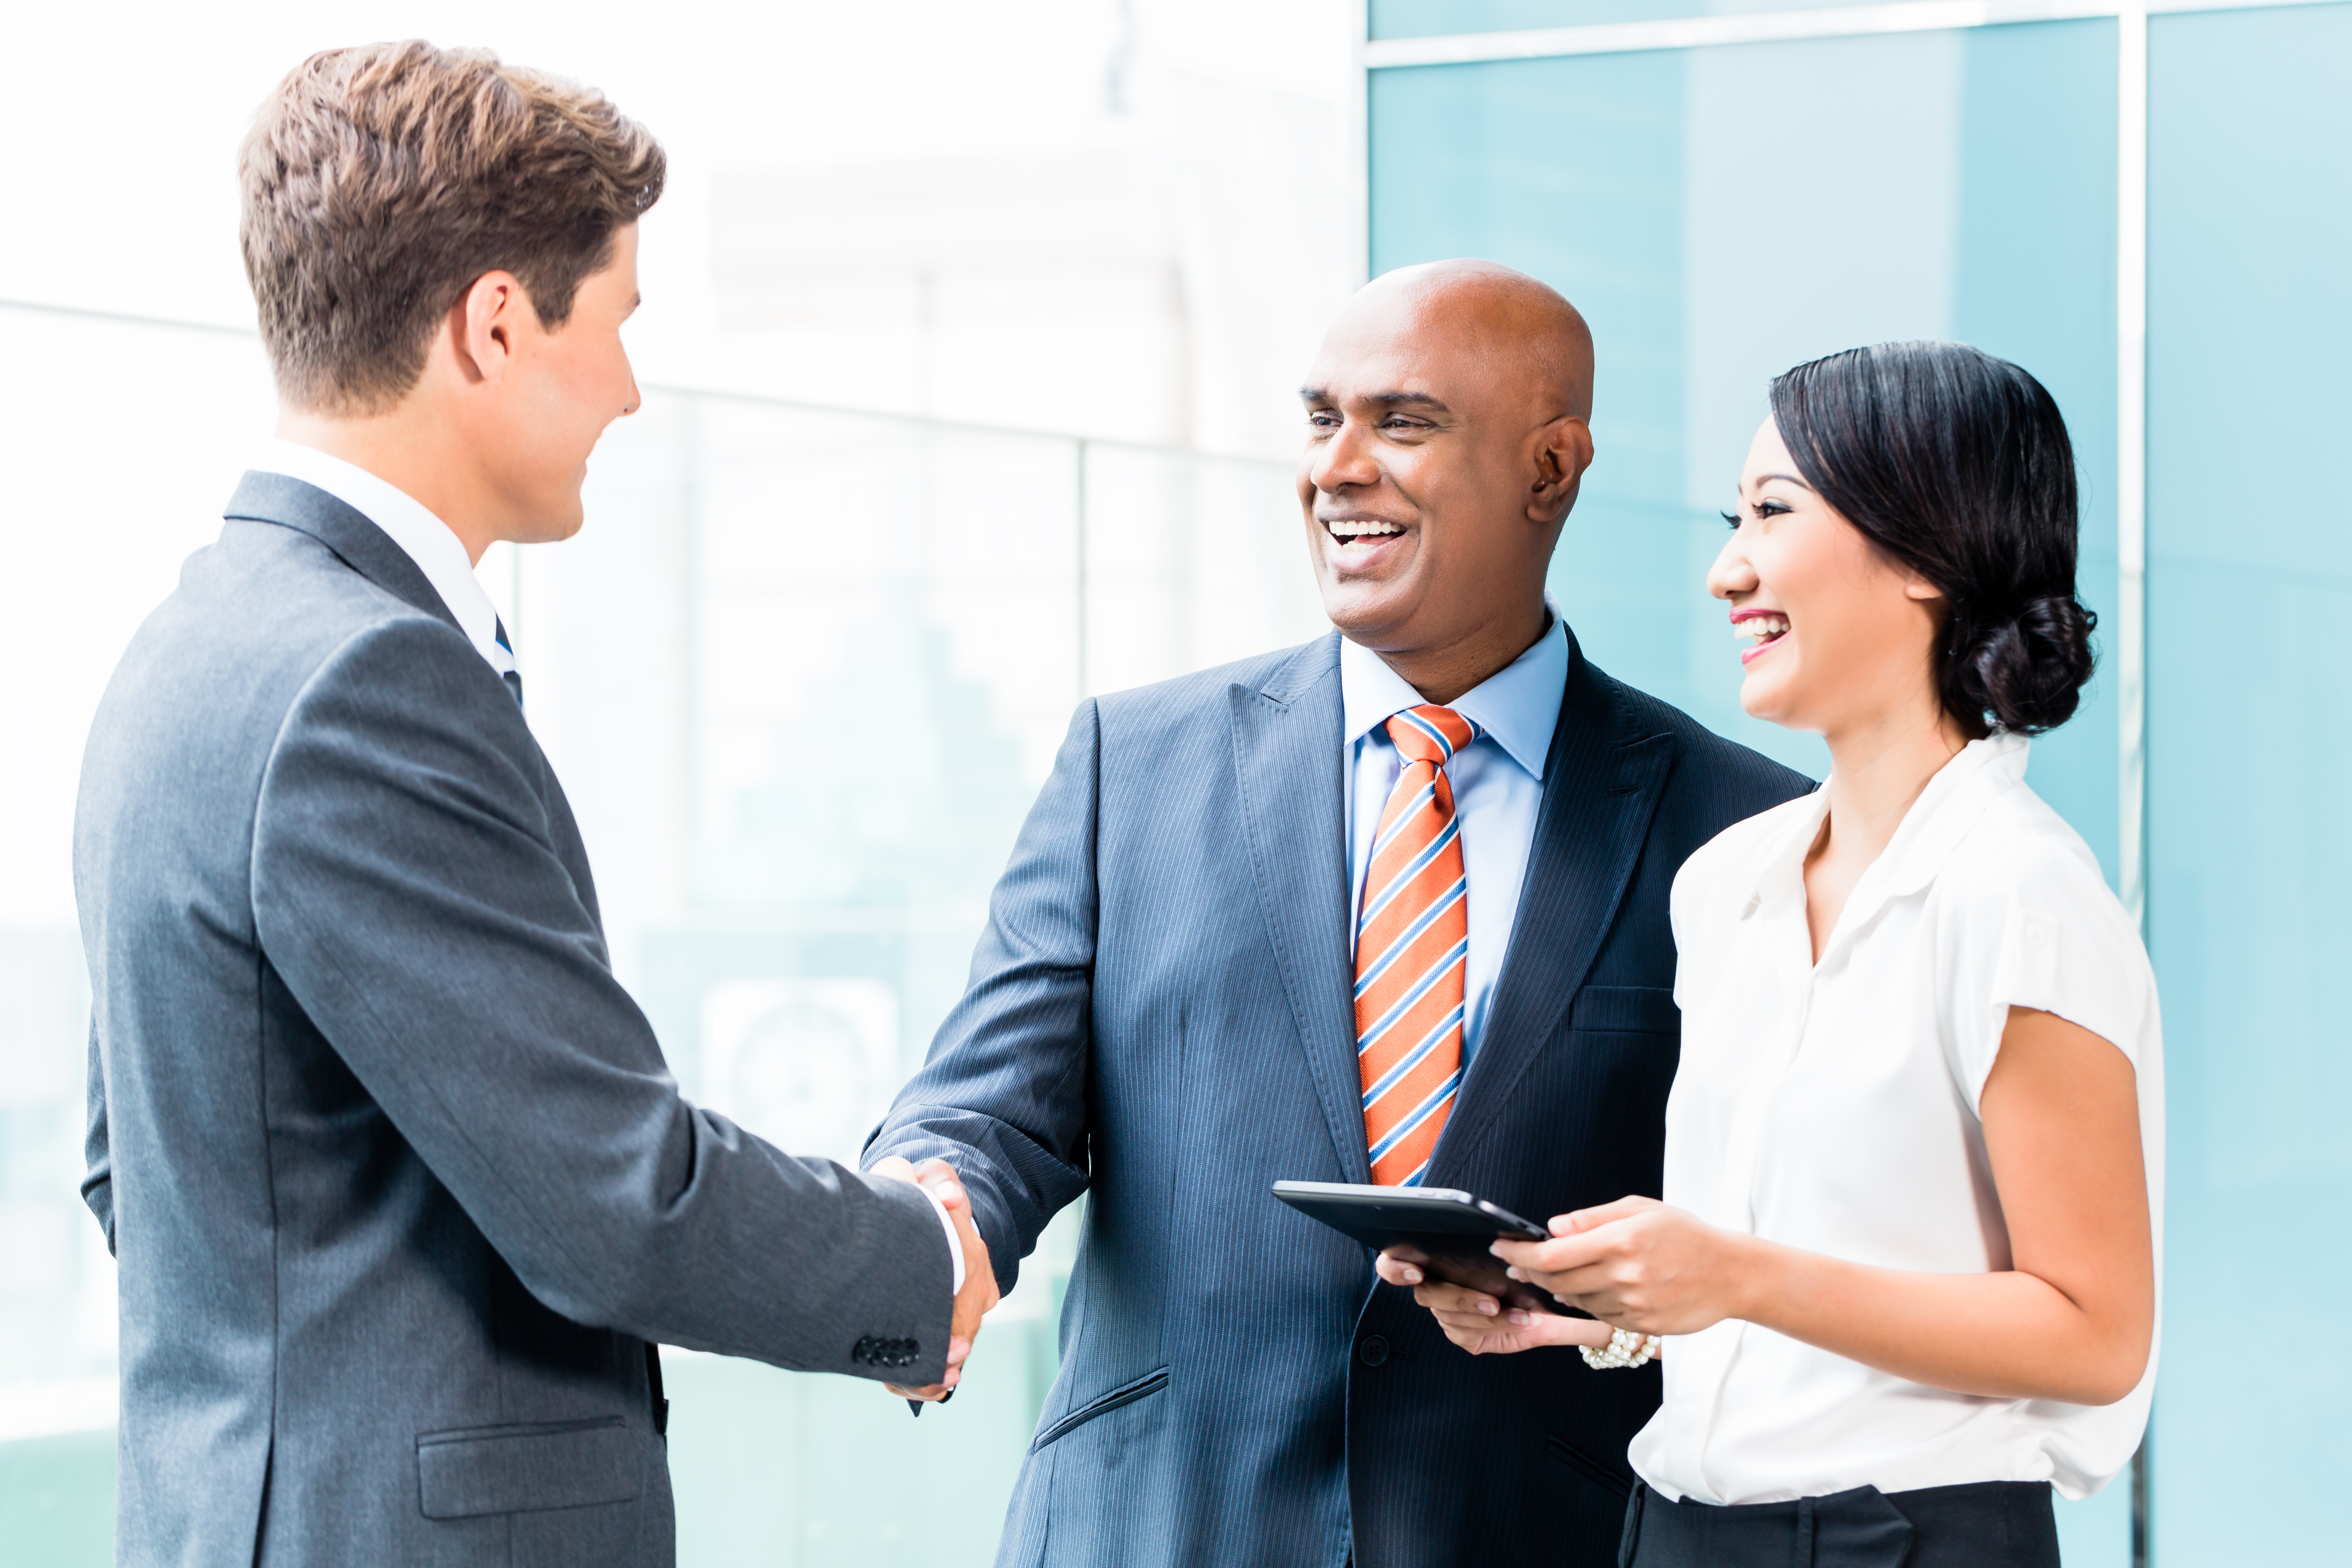 Salesman shakes hands with business leaders